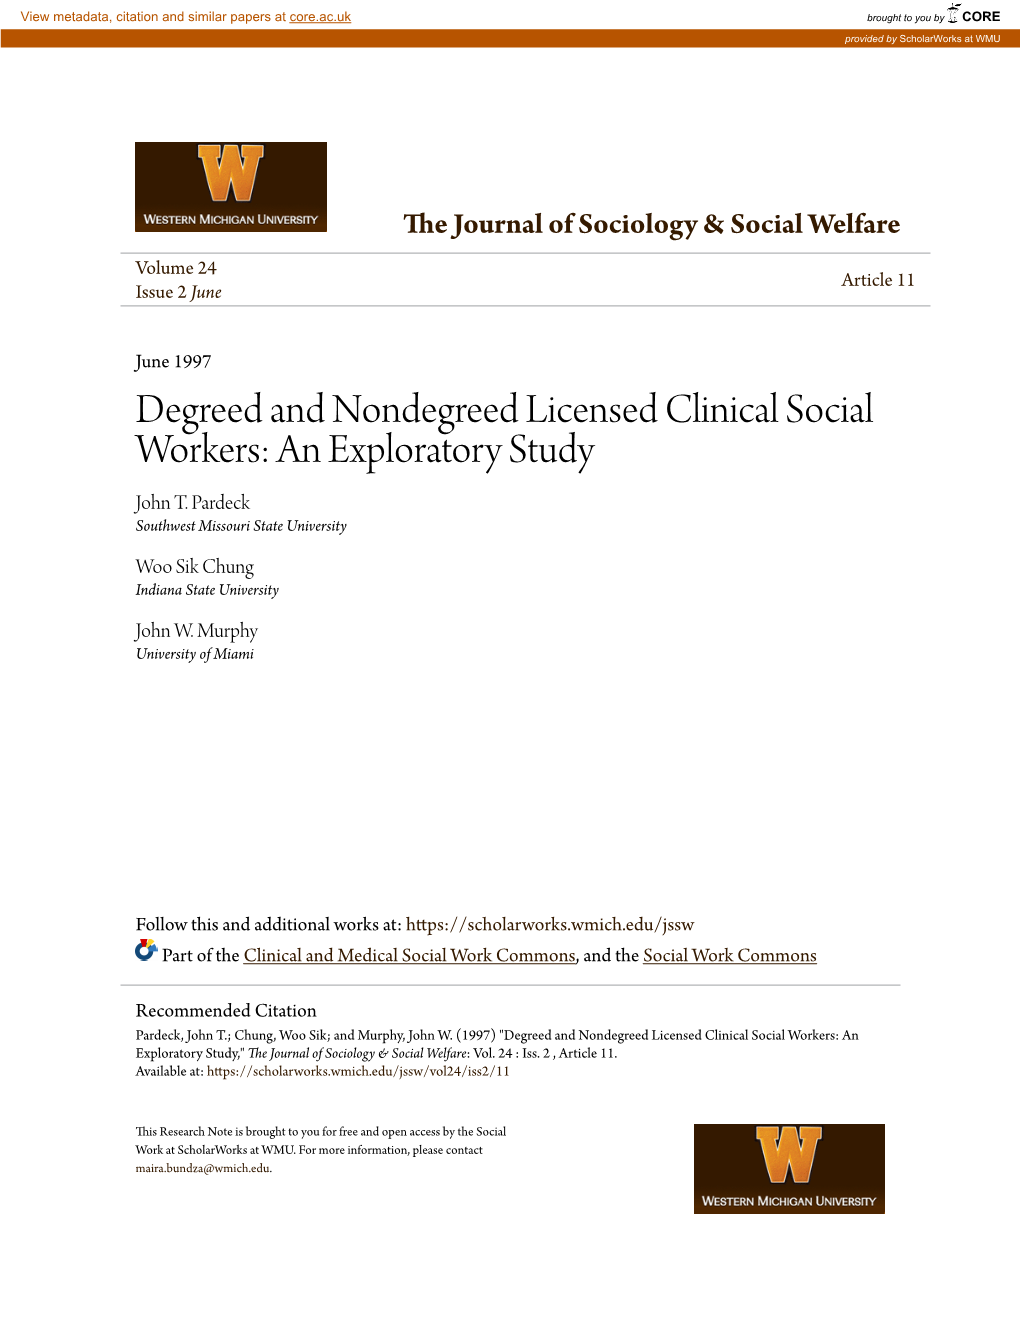 Degreed and Nondegreed Licensed Clinical Social Workers: an Exploratory Study John T